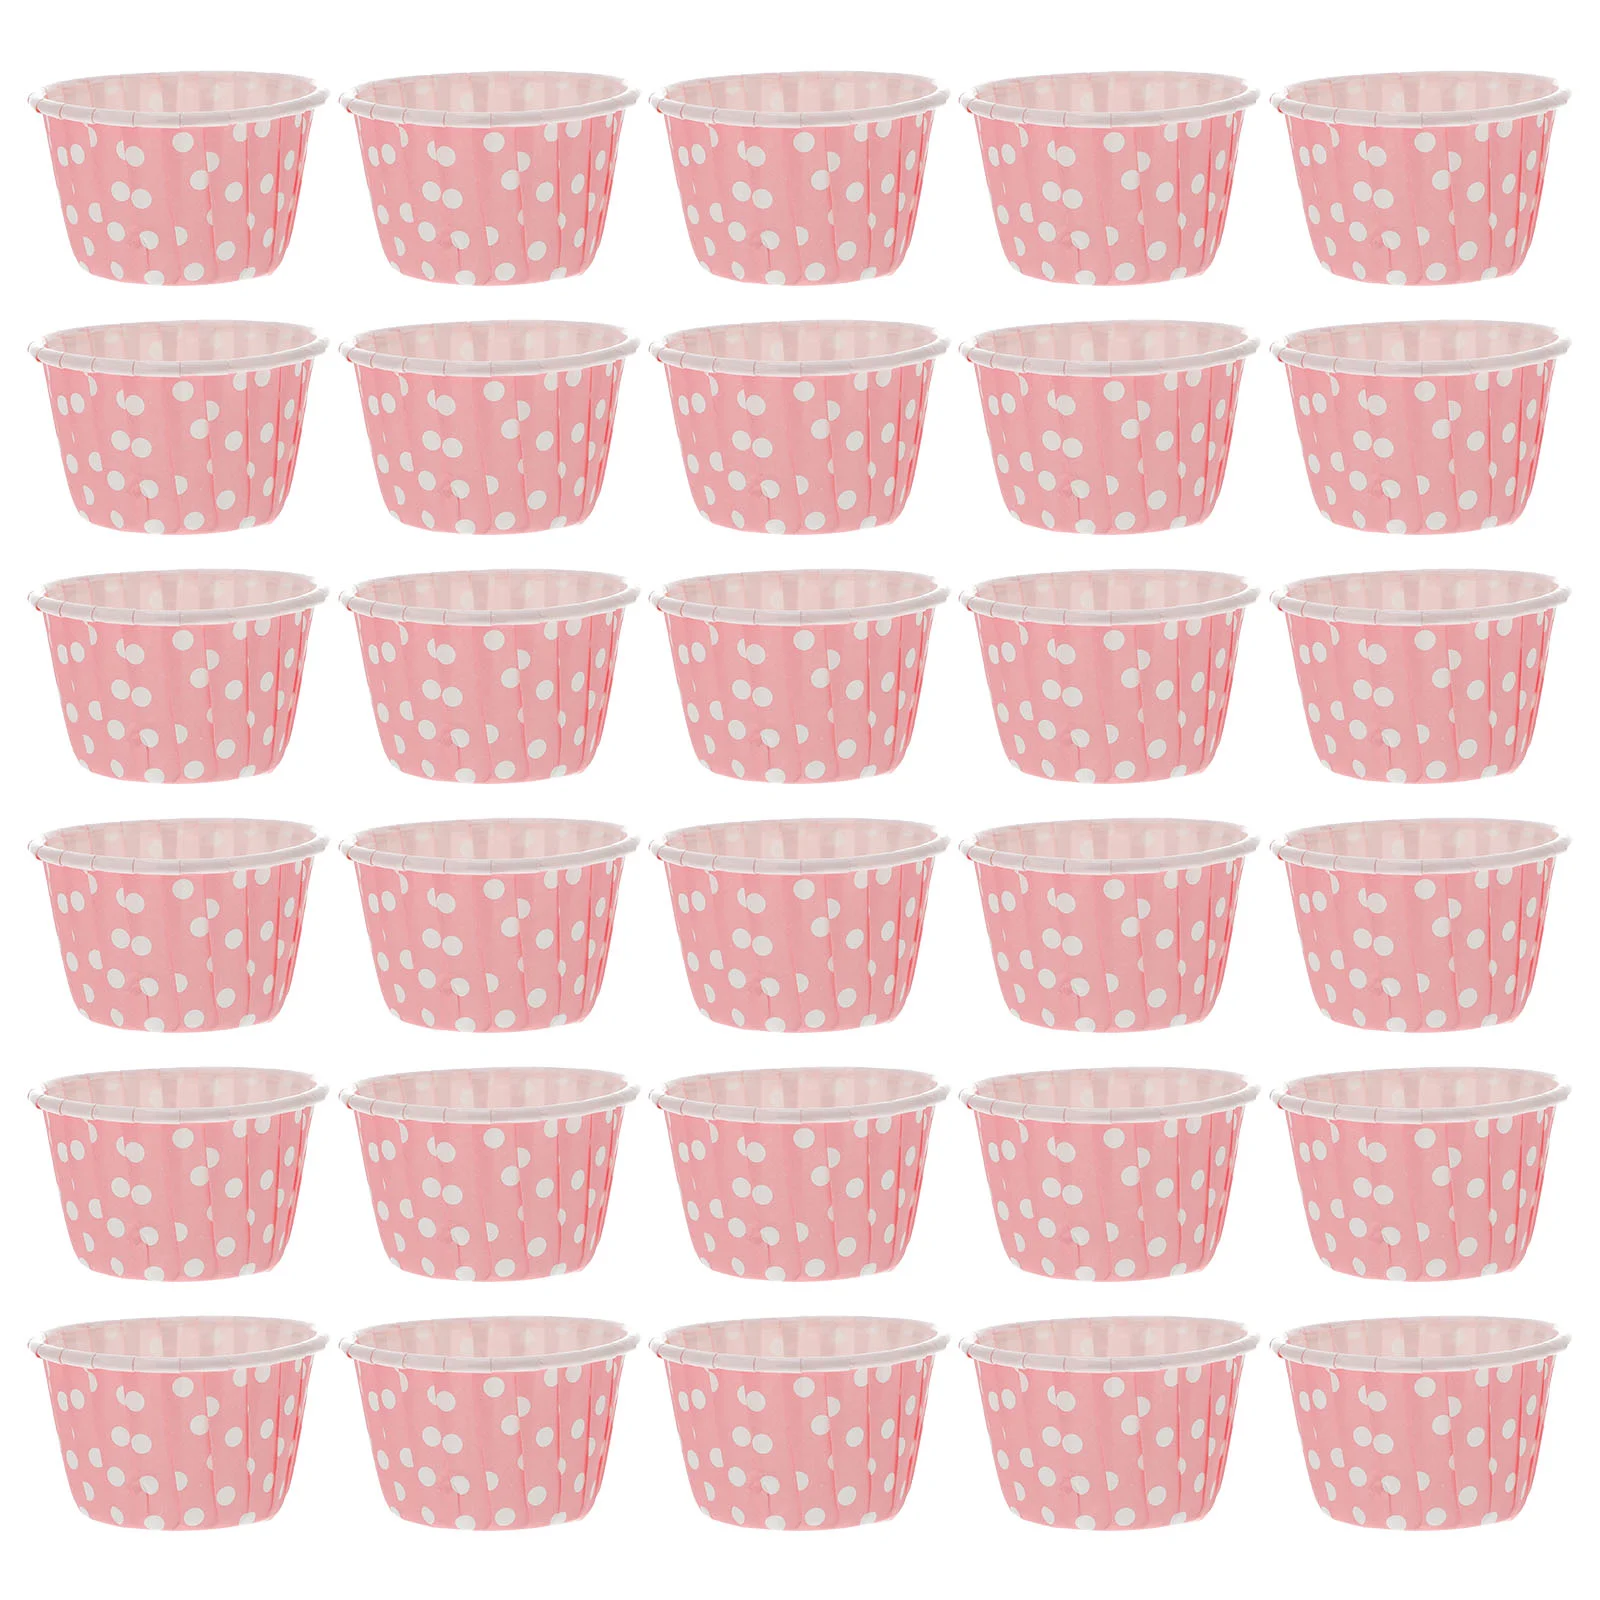 

50 Pcs Ice Cream Cups Cake Containers Lids Cupcake Wrappers Cake Bowl Disposable Dessert Cup Paper Salad Bowls